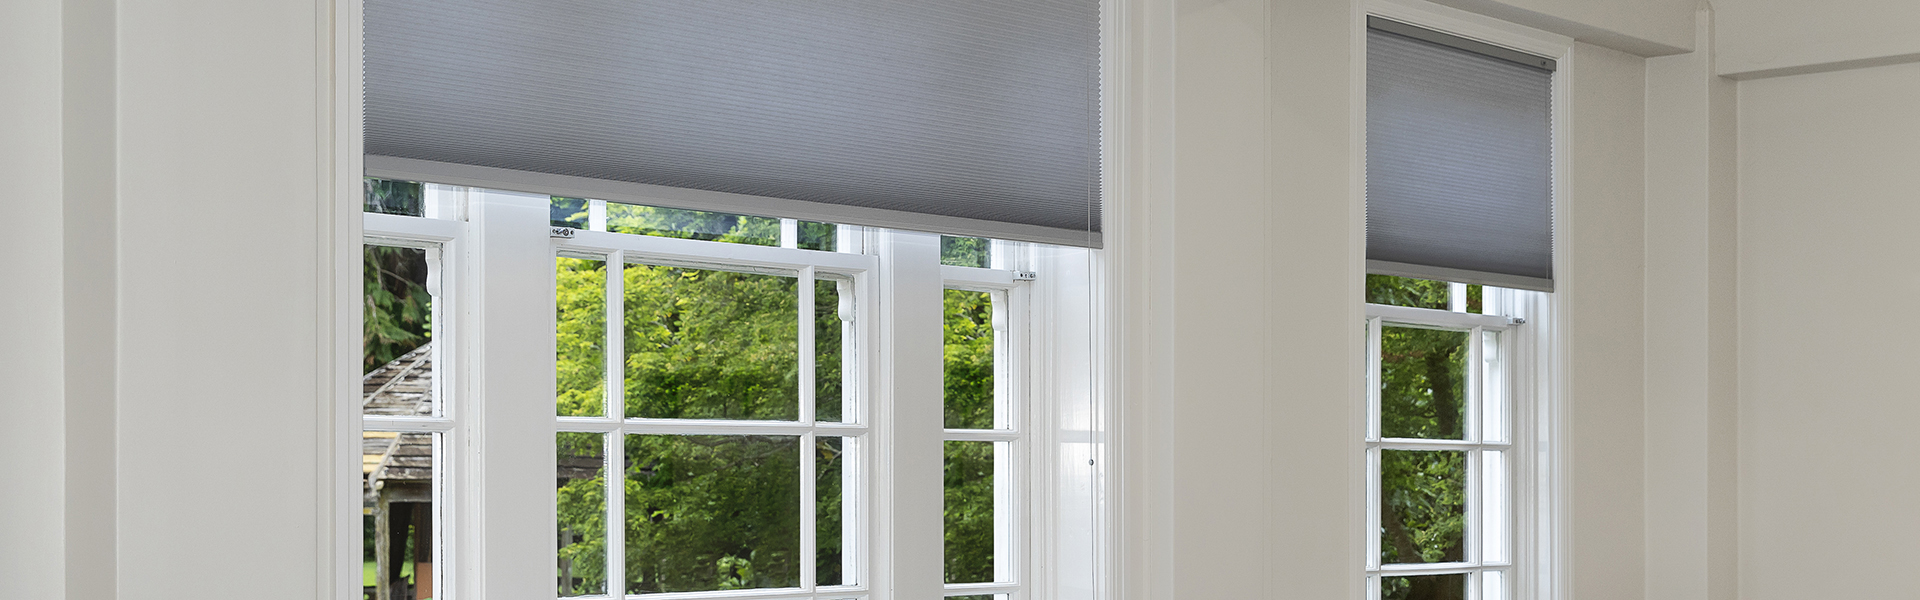 Insulated Blinds